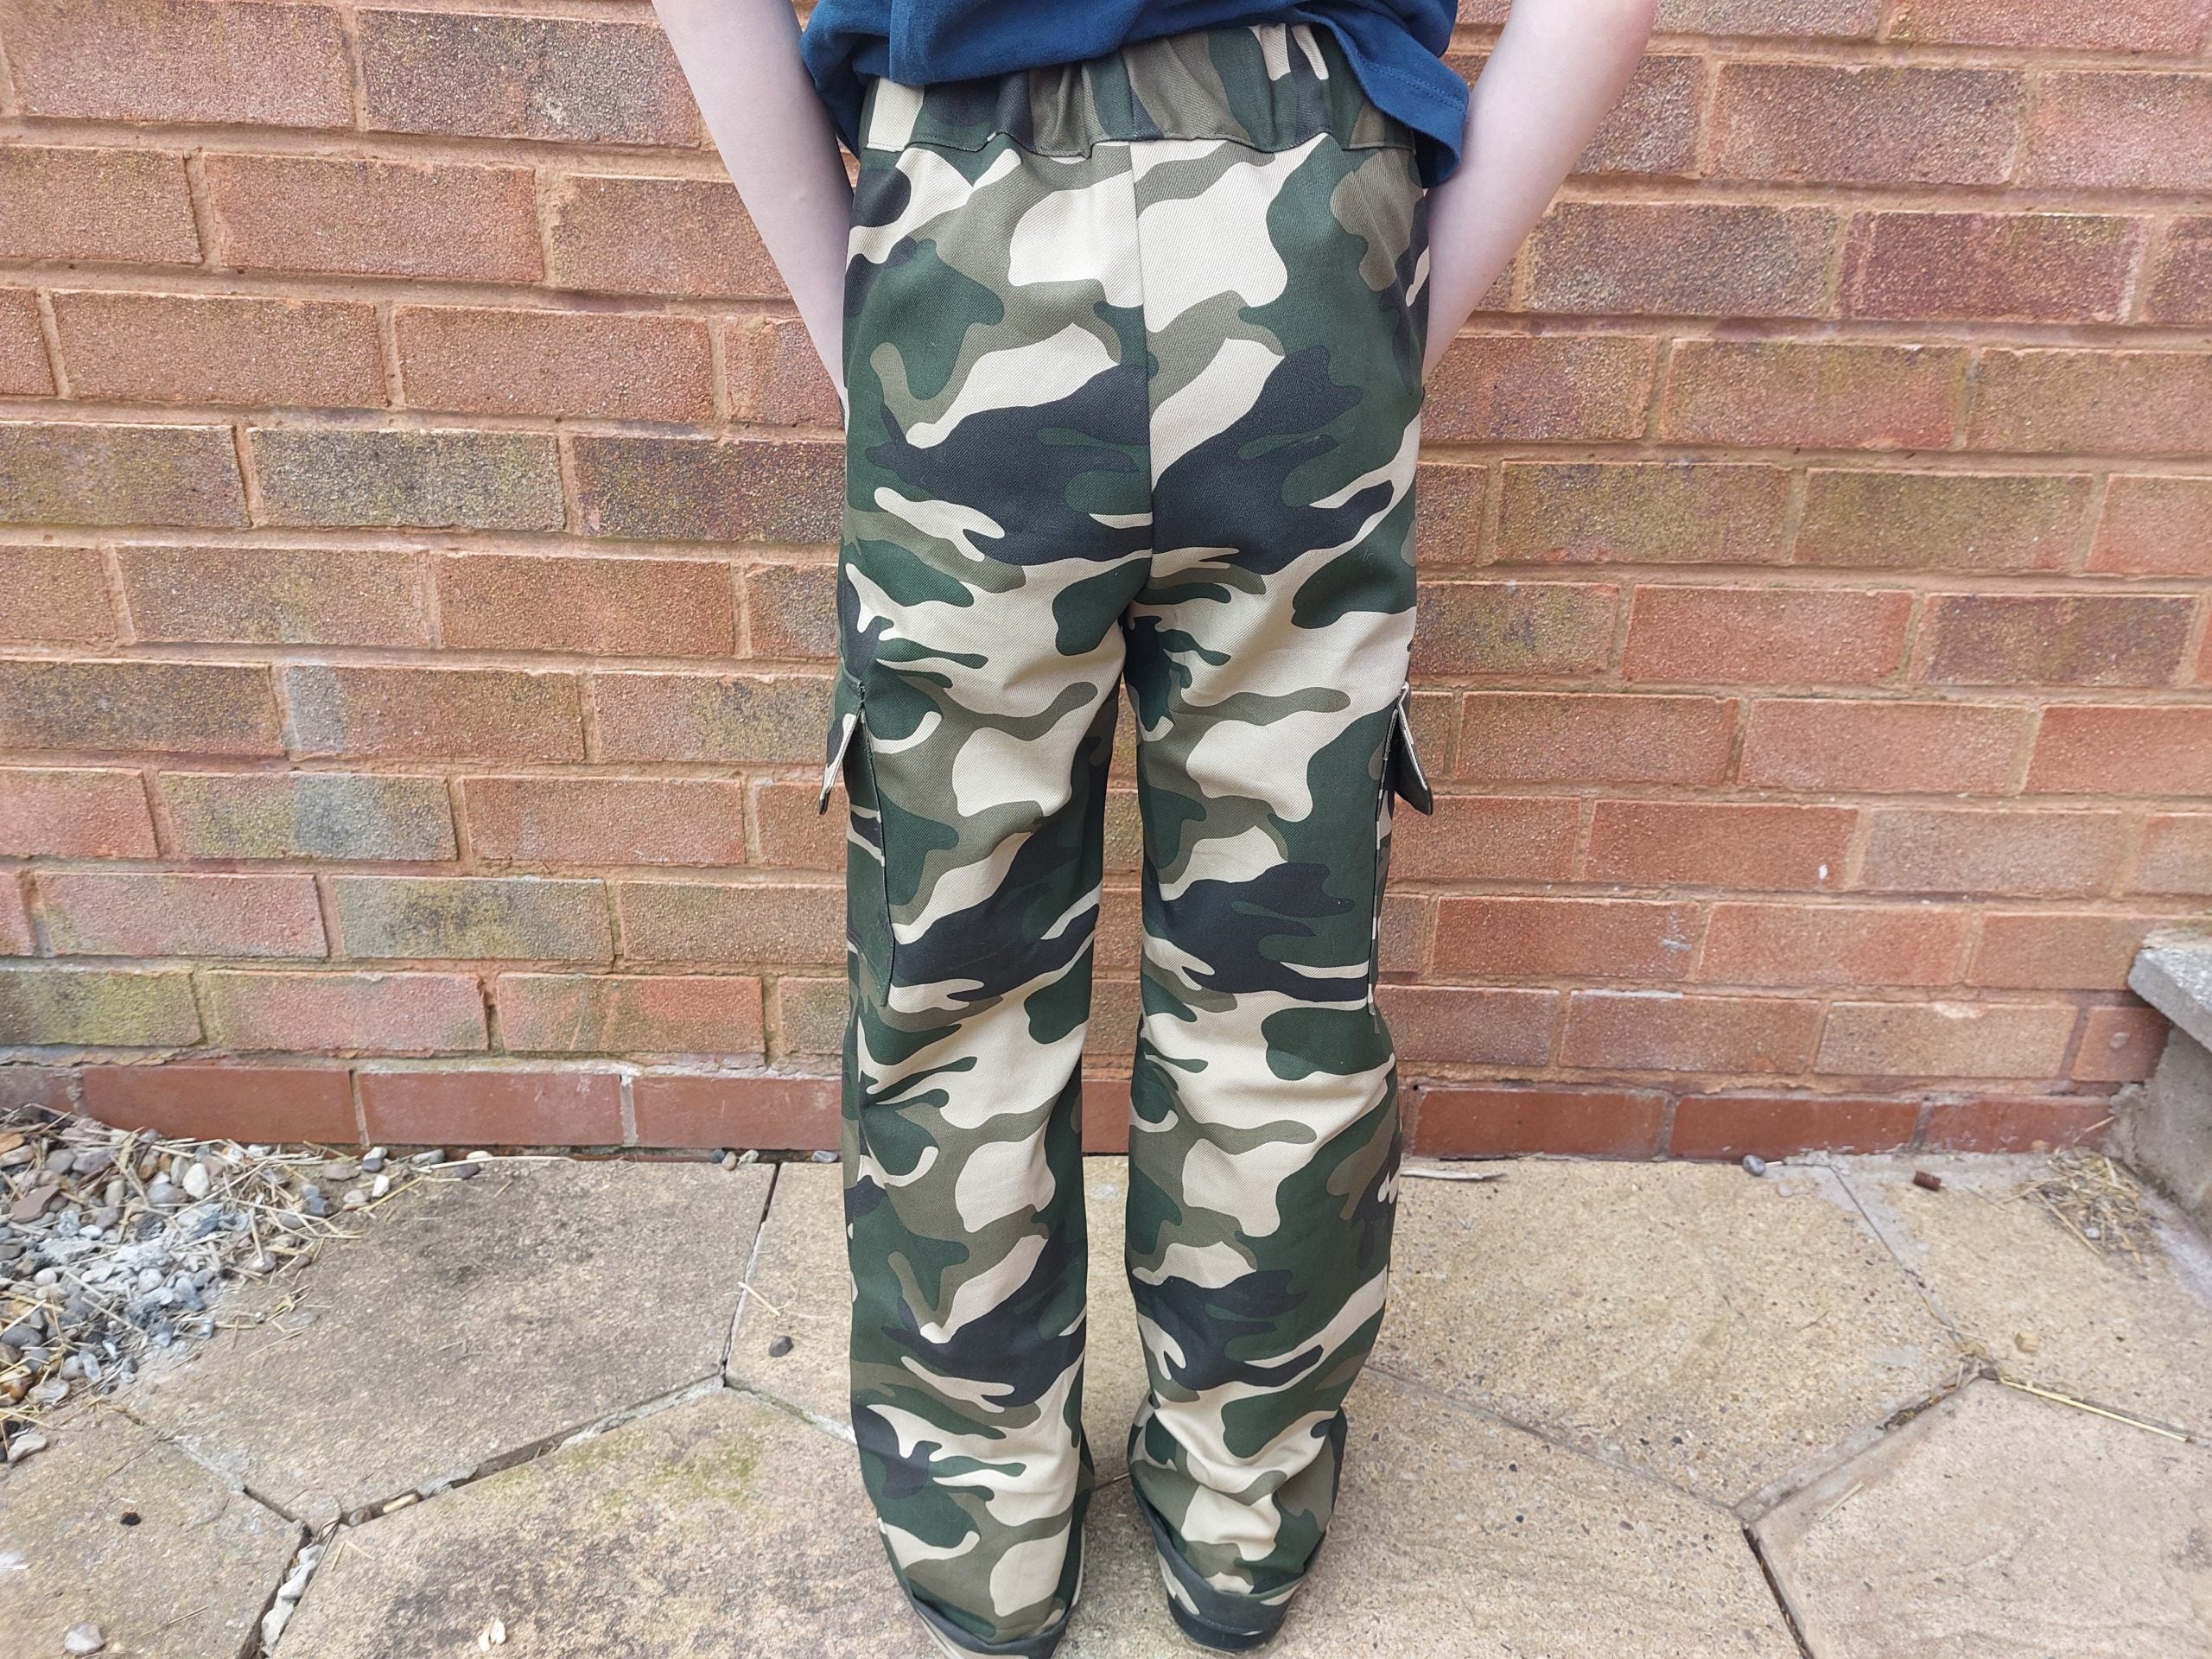 Waves & Wild Baby/Child Collector Cargo Pants/Shorts